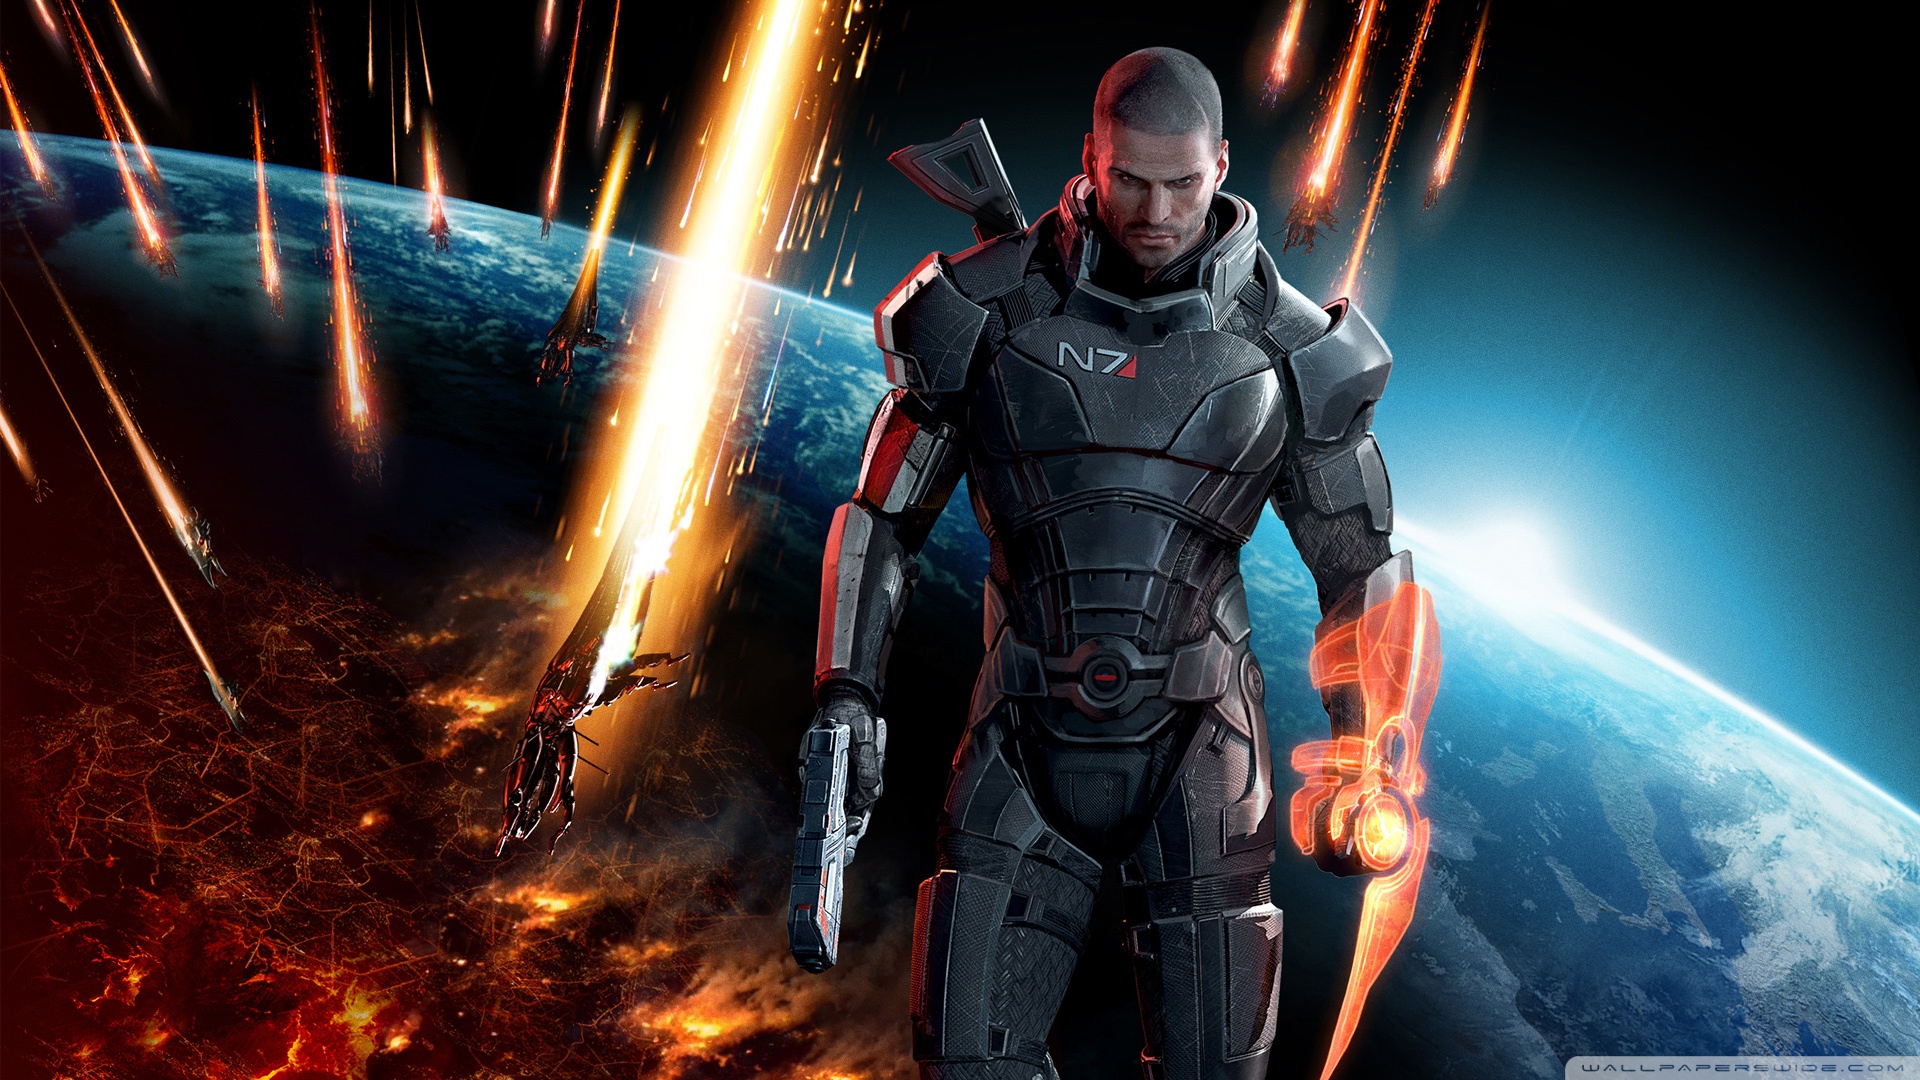 Free Download Mass Effect X For Your Desktop Mobile Tablet Explore Mass